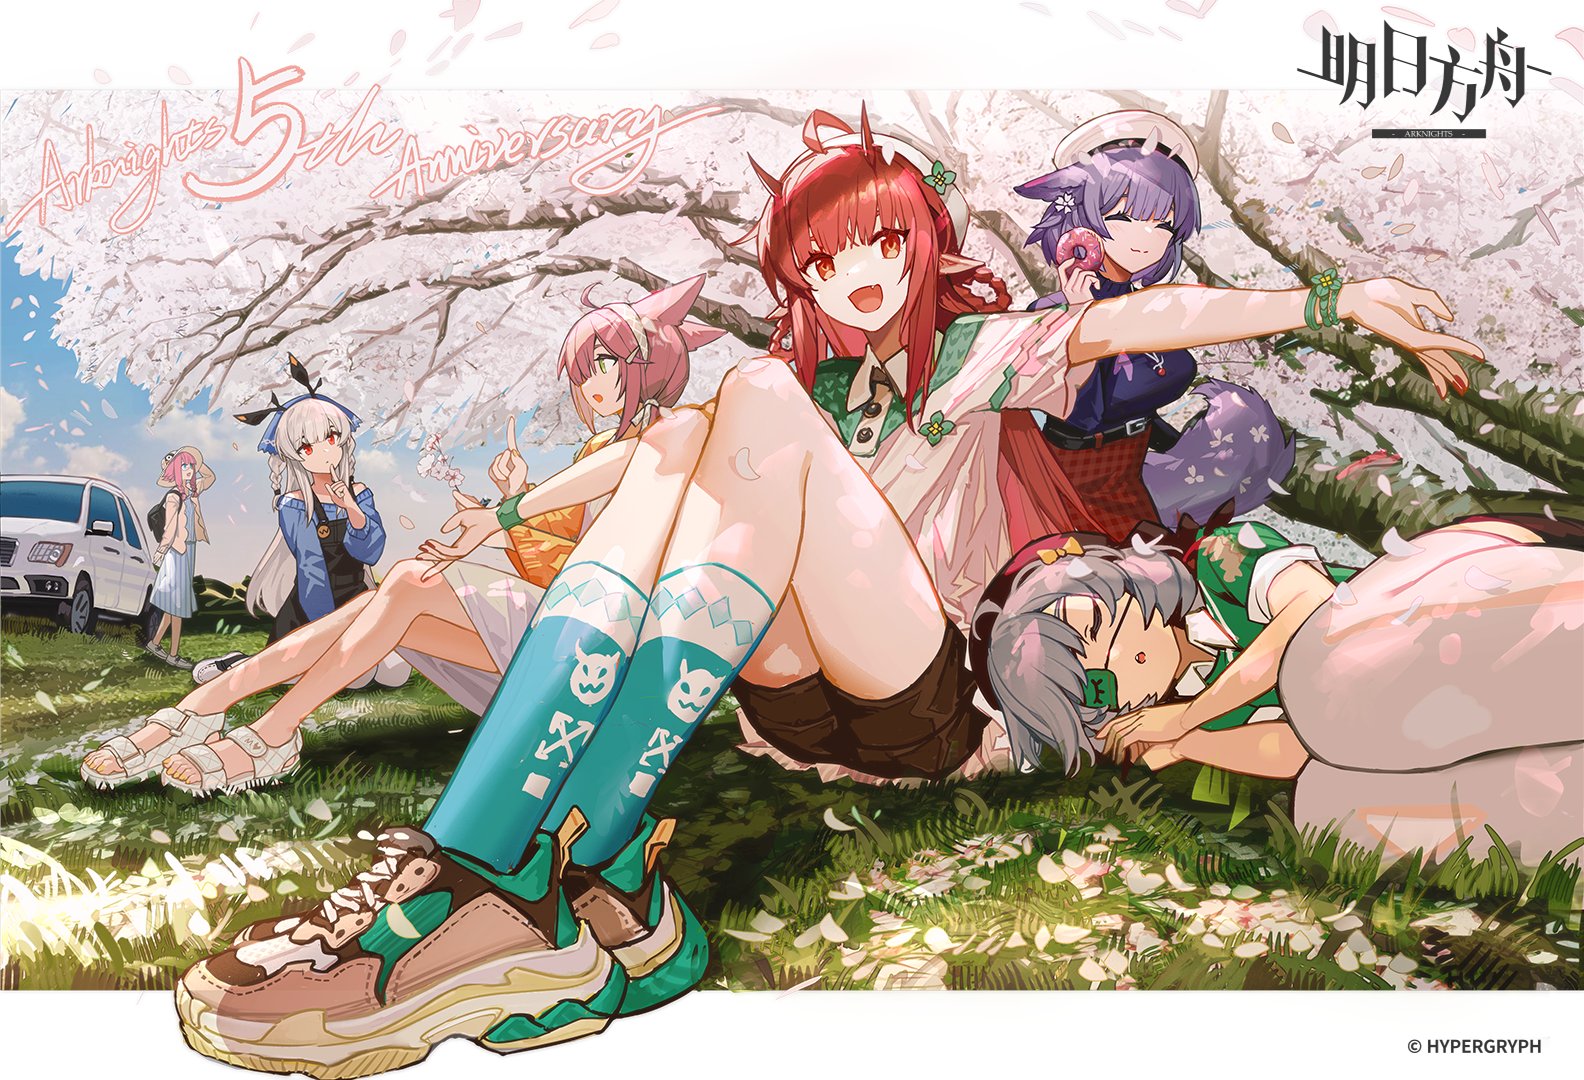 Anime 1584x1080 Arknights cherry blossom May (Arknights) sleeping Myrrh(Arknights) sneakers Popukar (Arknights) grass Provence (Arknights) sky Vigna (Arknights) branch Weedy (Arknights) trees white cars animal ears hair ornament sitting eyepatches berets open arms flowers text watermarked sandals pointy ears group of women car anniversary outdoors Xiayehongming spring